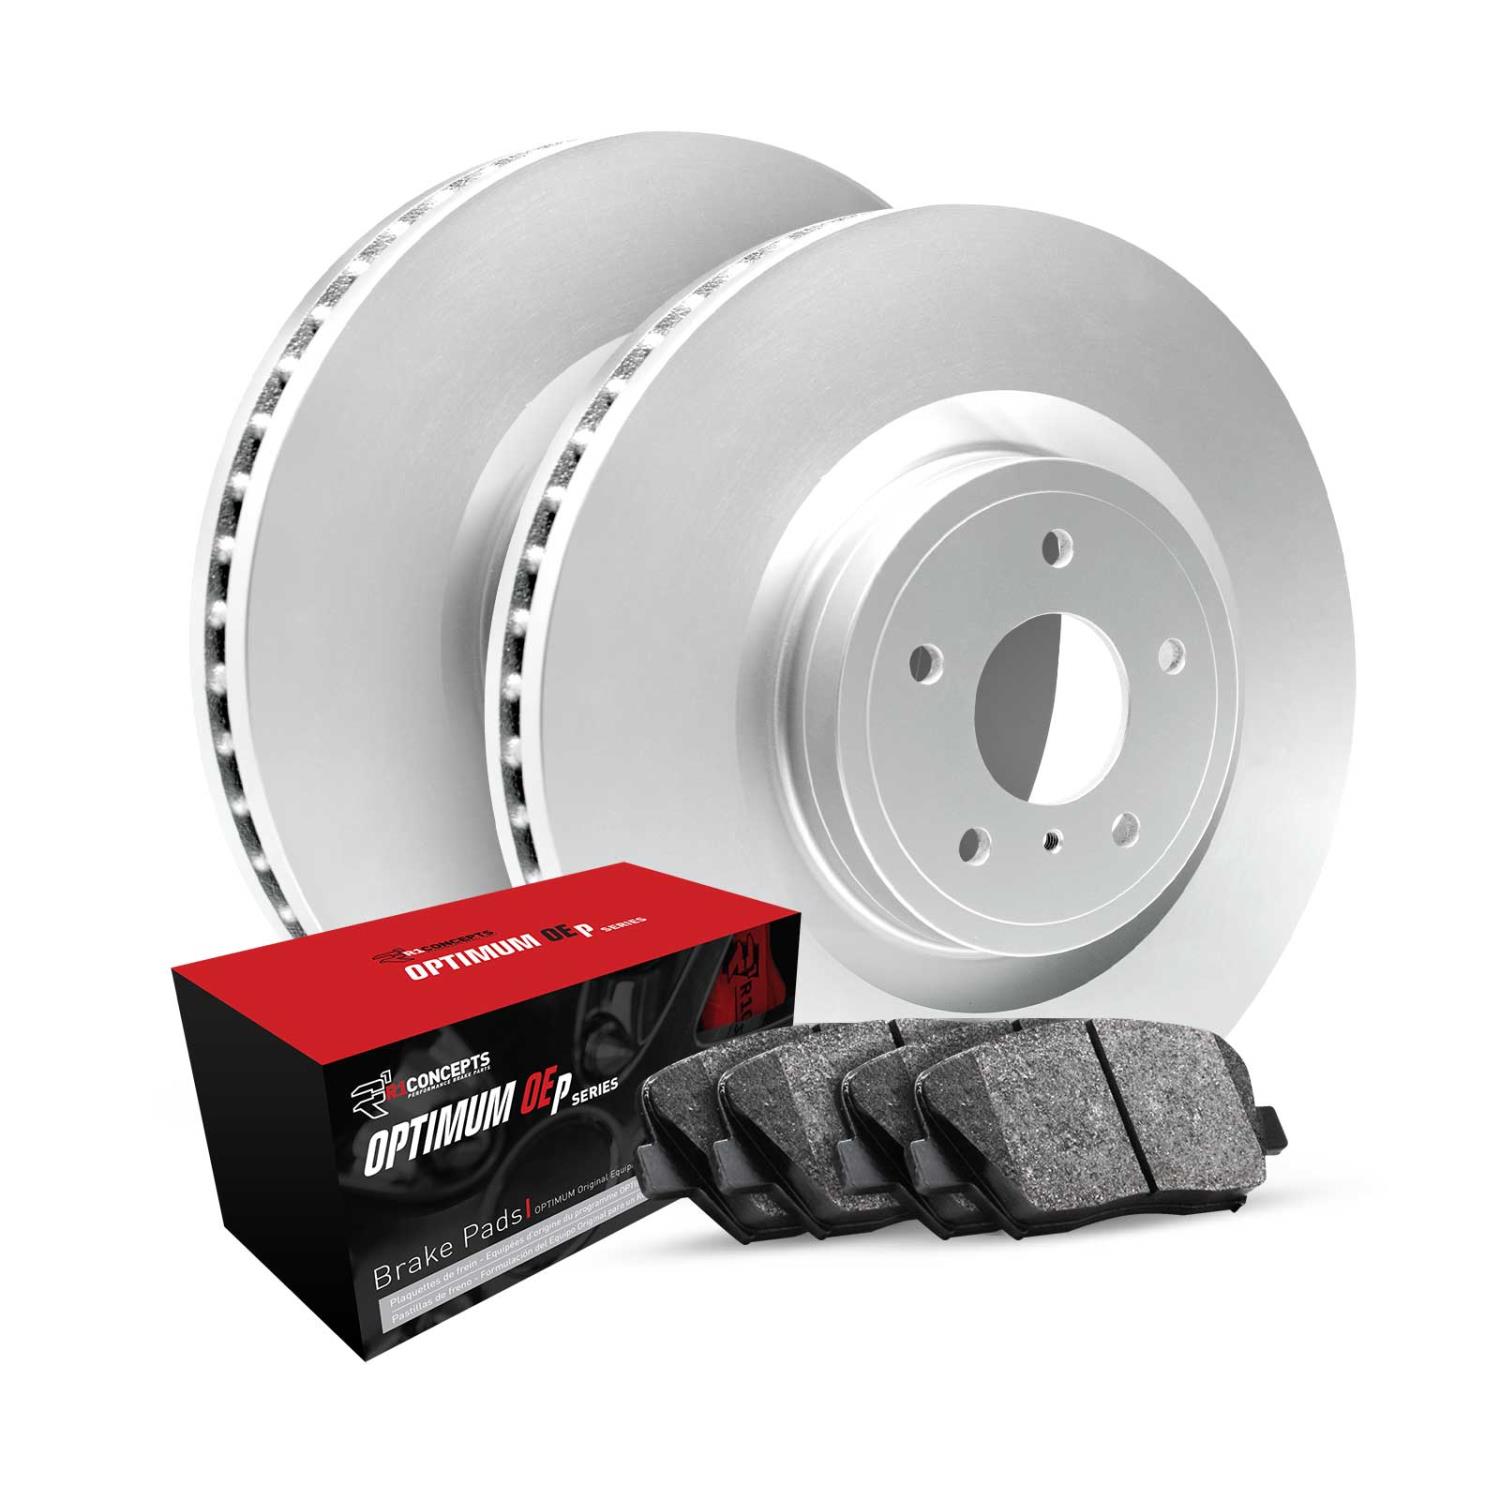 GEO-Carbon Brake Rotors w/5000 Oep Pads, 1996-2015 Fits Multiple Makes/Models, Position: Rear